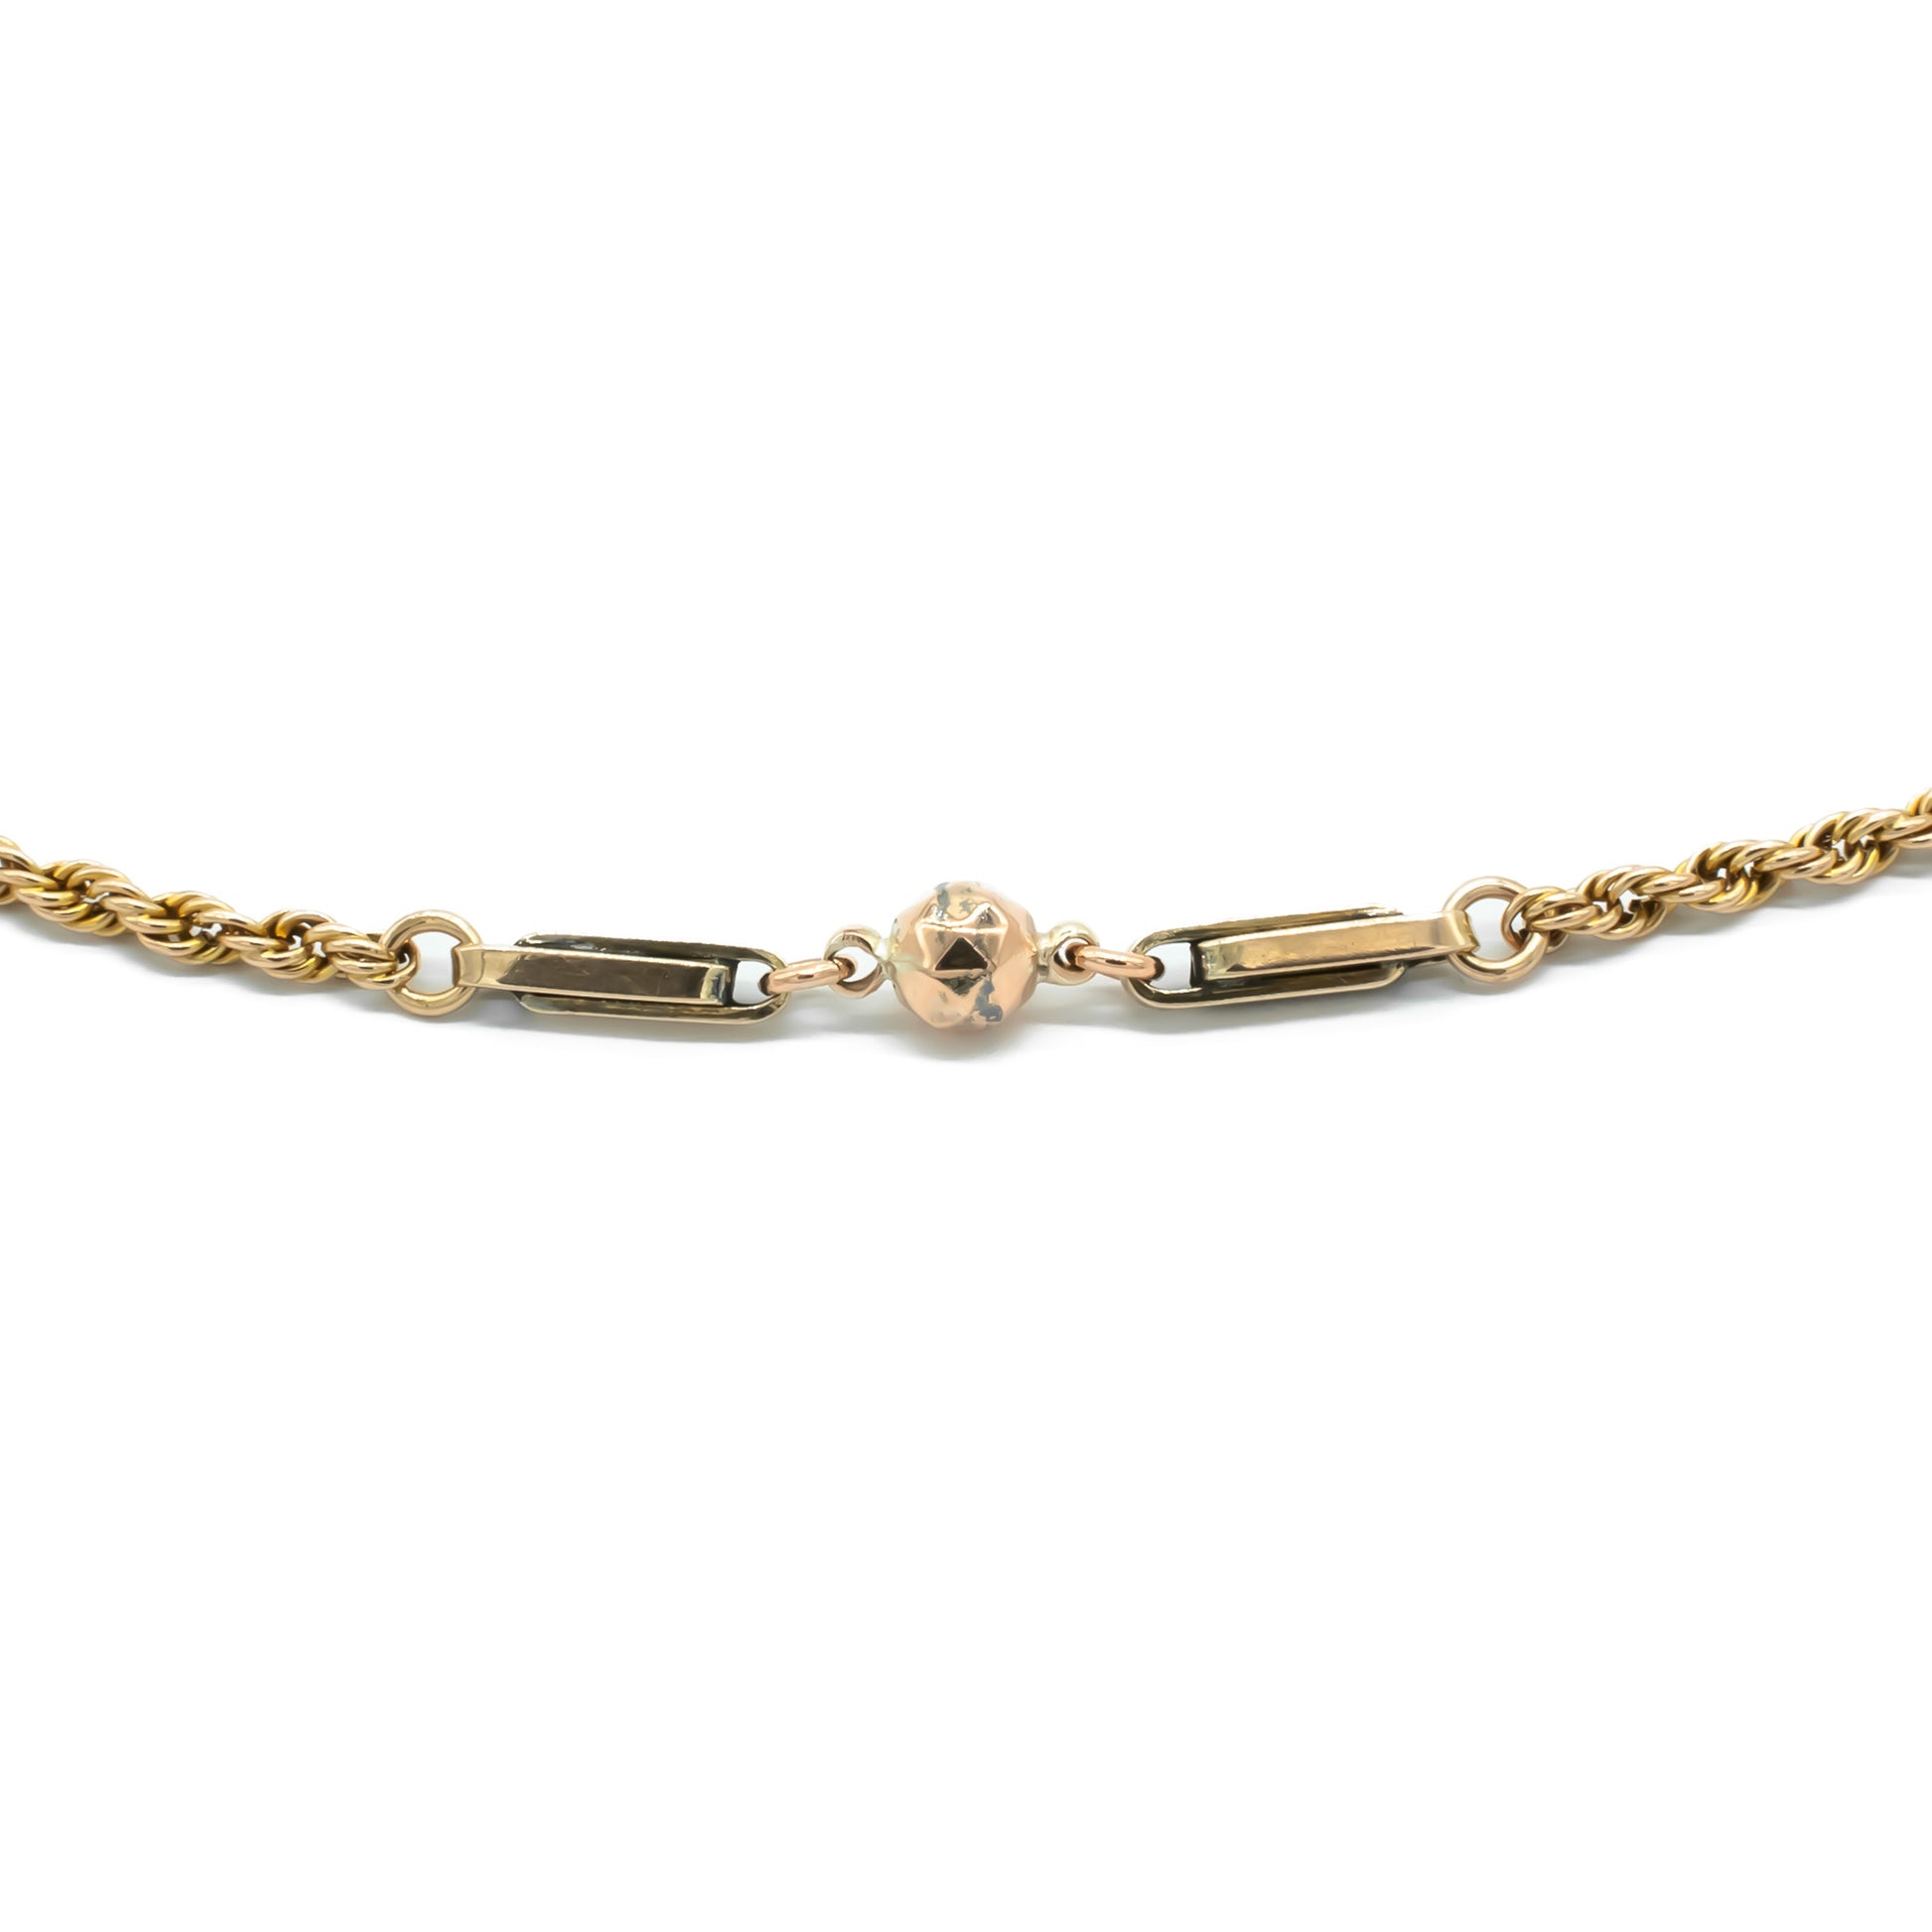 Exquisite Victorian 9ct rose gold fancy link rope chain with dog clip attachment. Can be worn as a single or double chain.